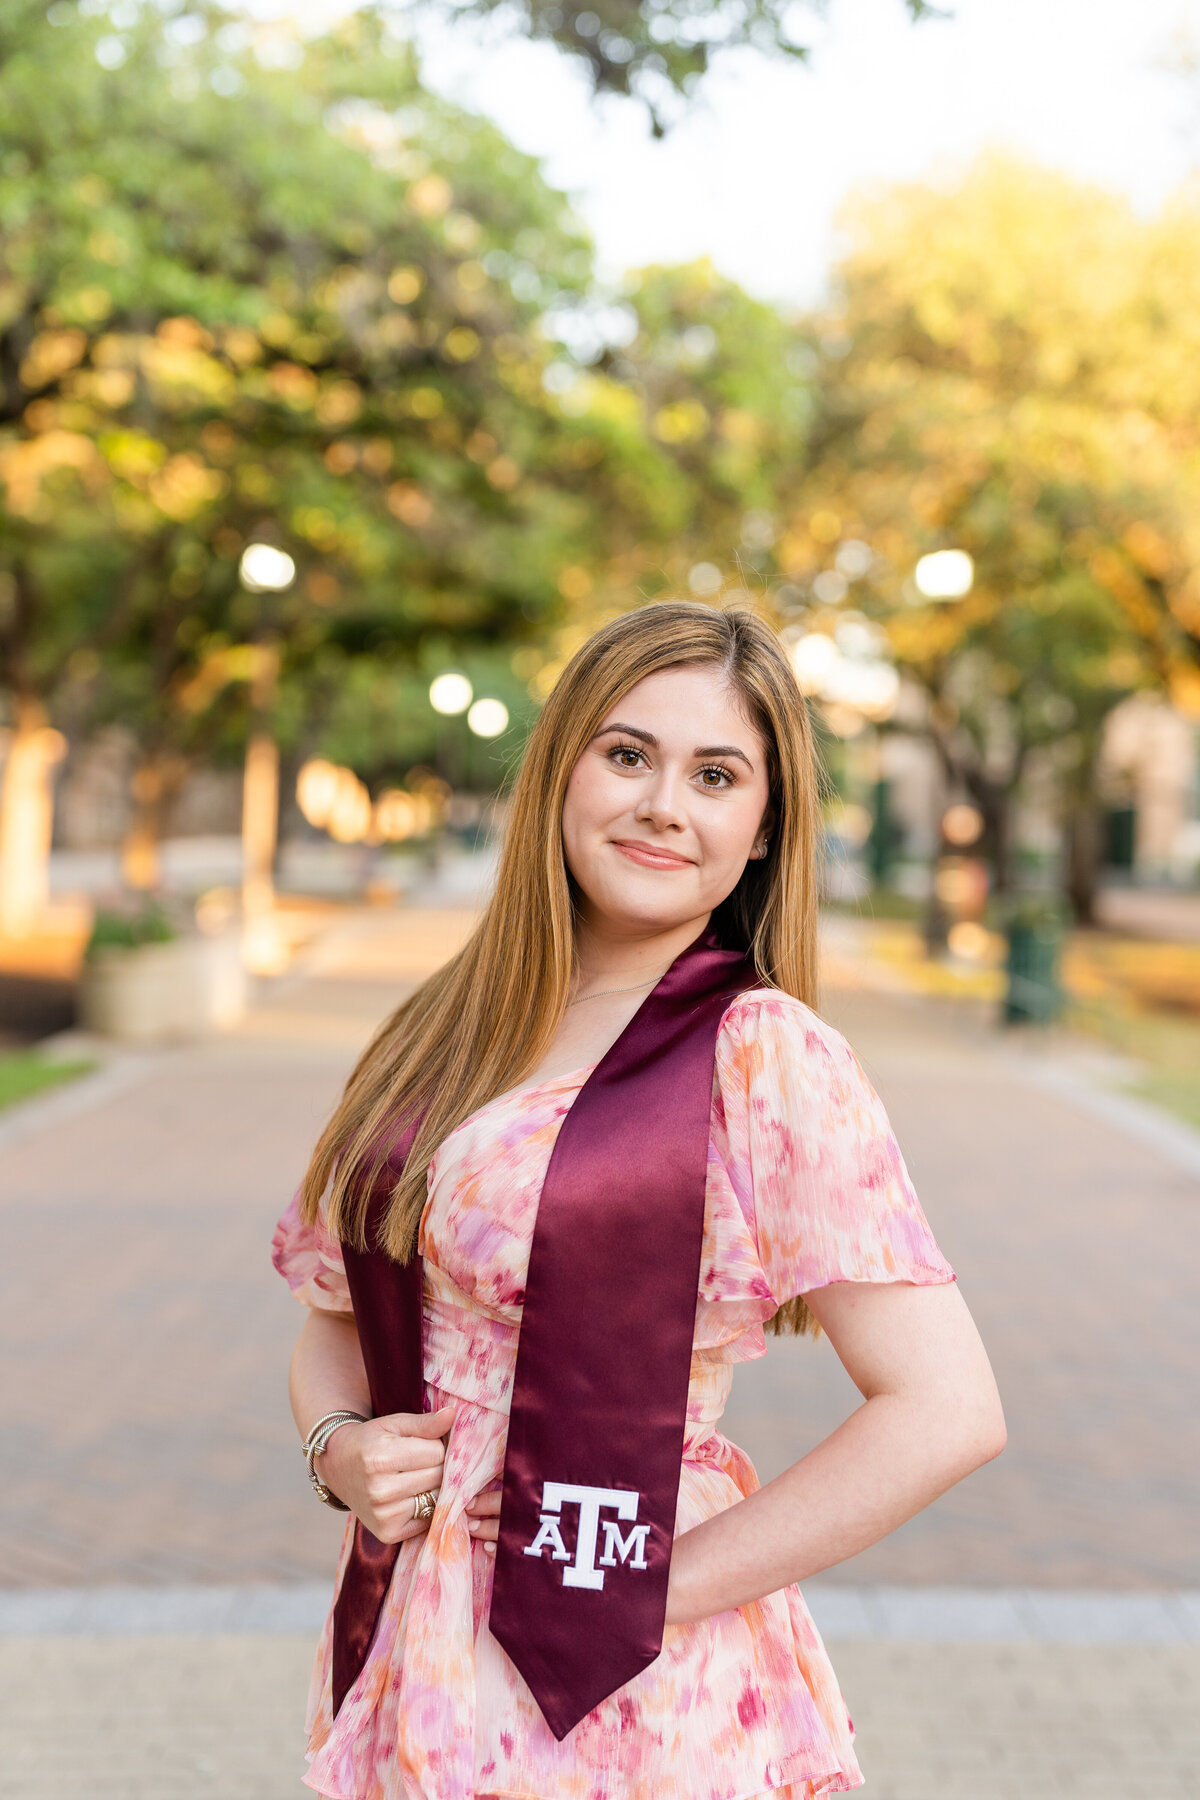 Texas A&M senior girl smiling in Military Plaza with a pink dress and maroon stole at sunset